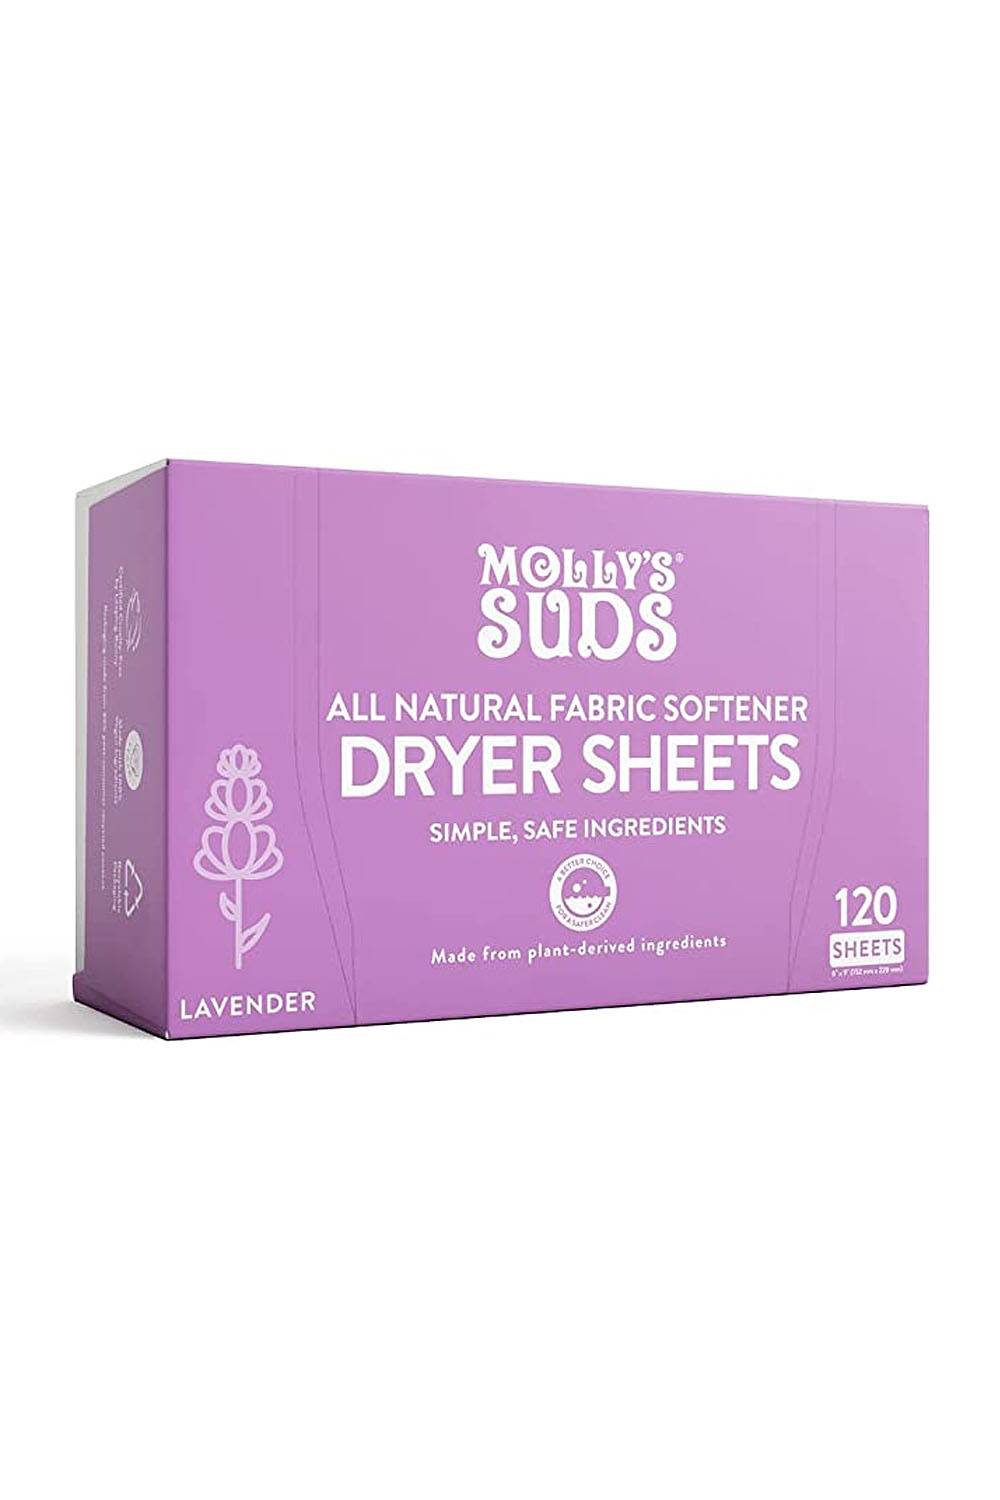 mollys suds compostable dryer sheets